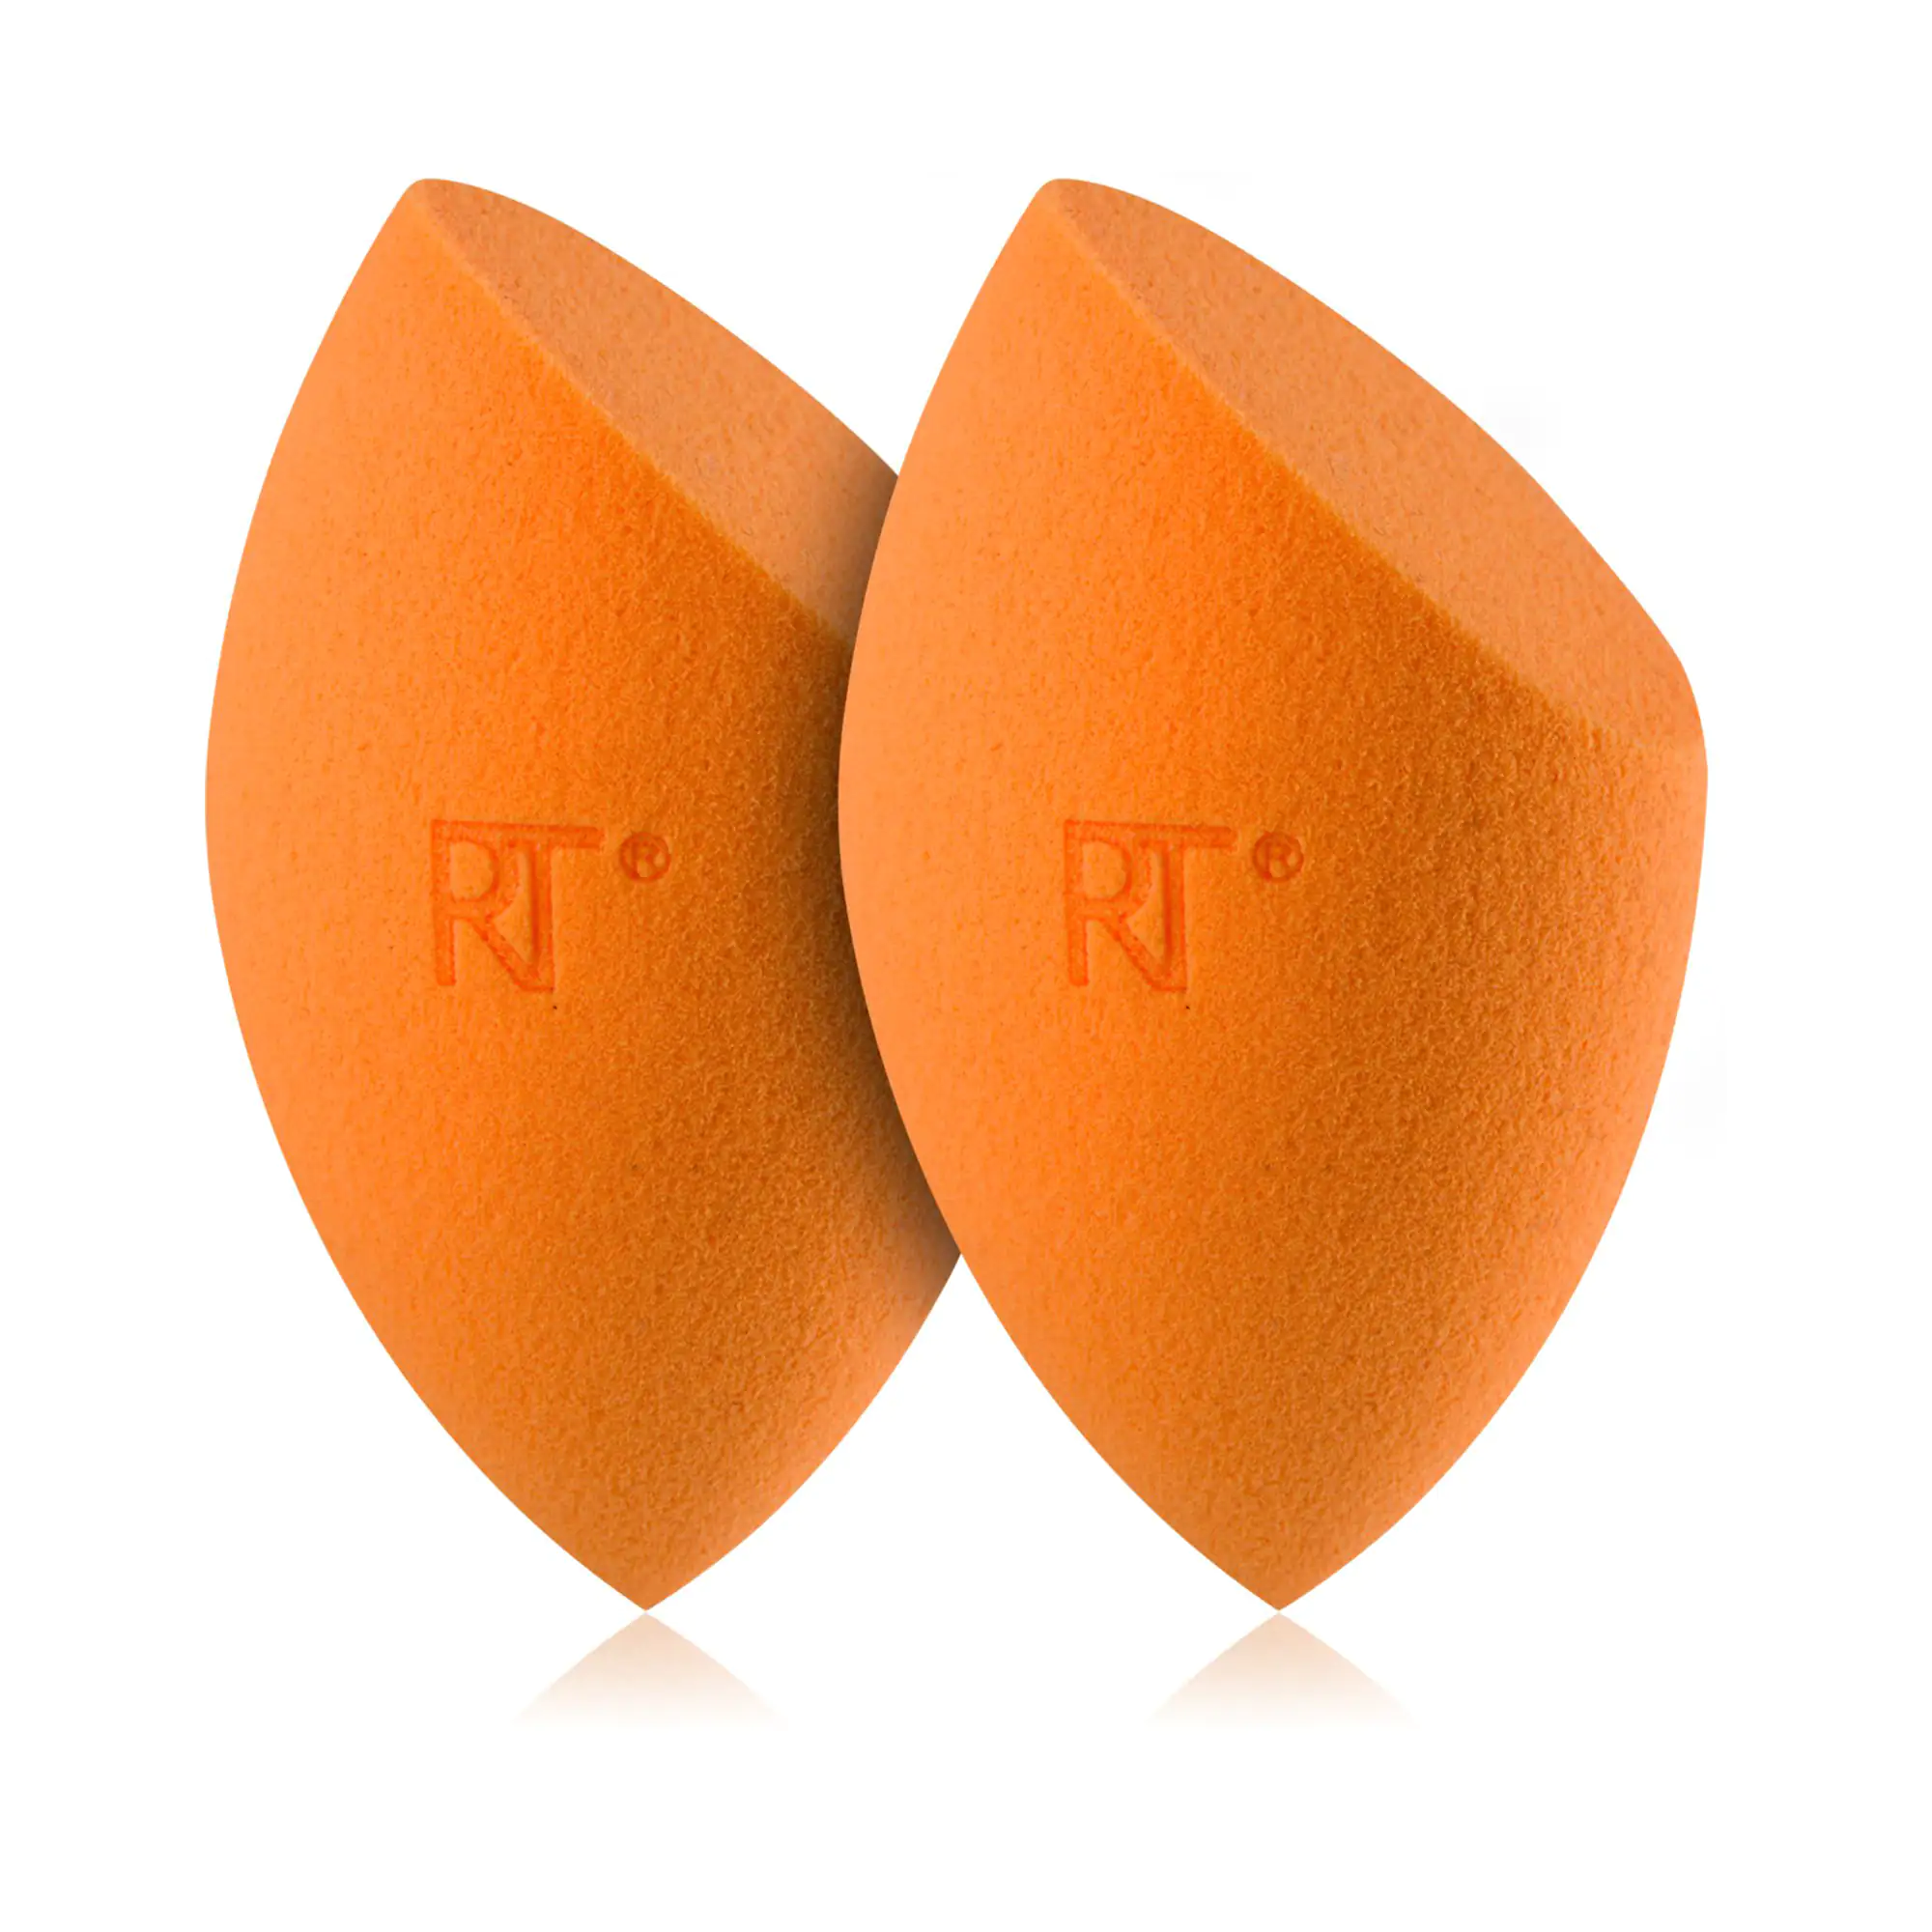 Real Techniques Exclusive Miracle Complexion Sponge Antimicrobial 2 PACK